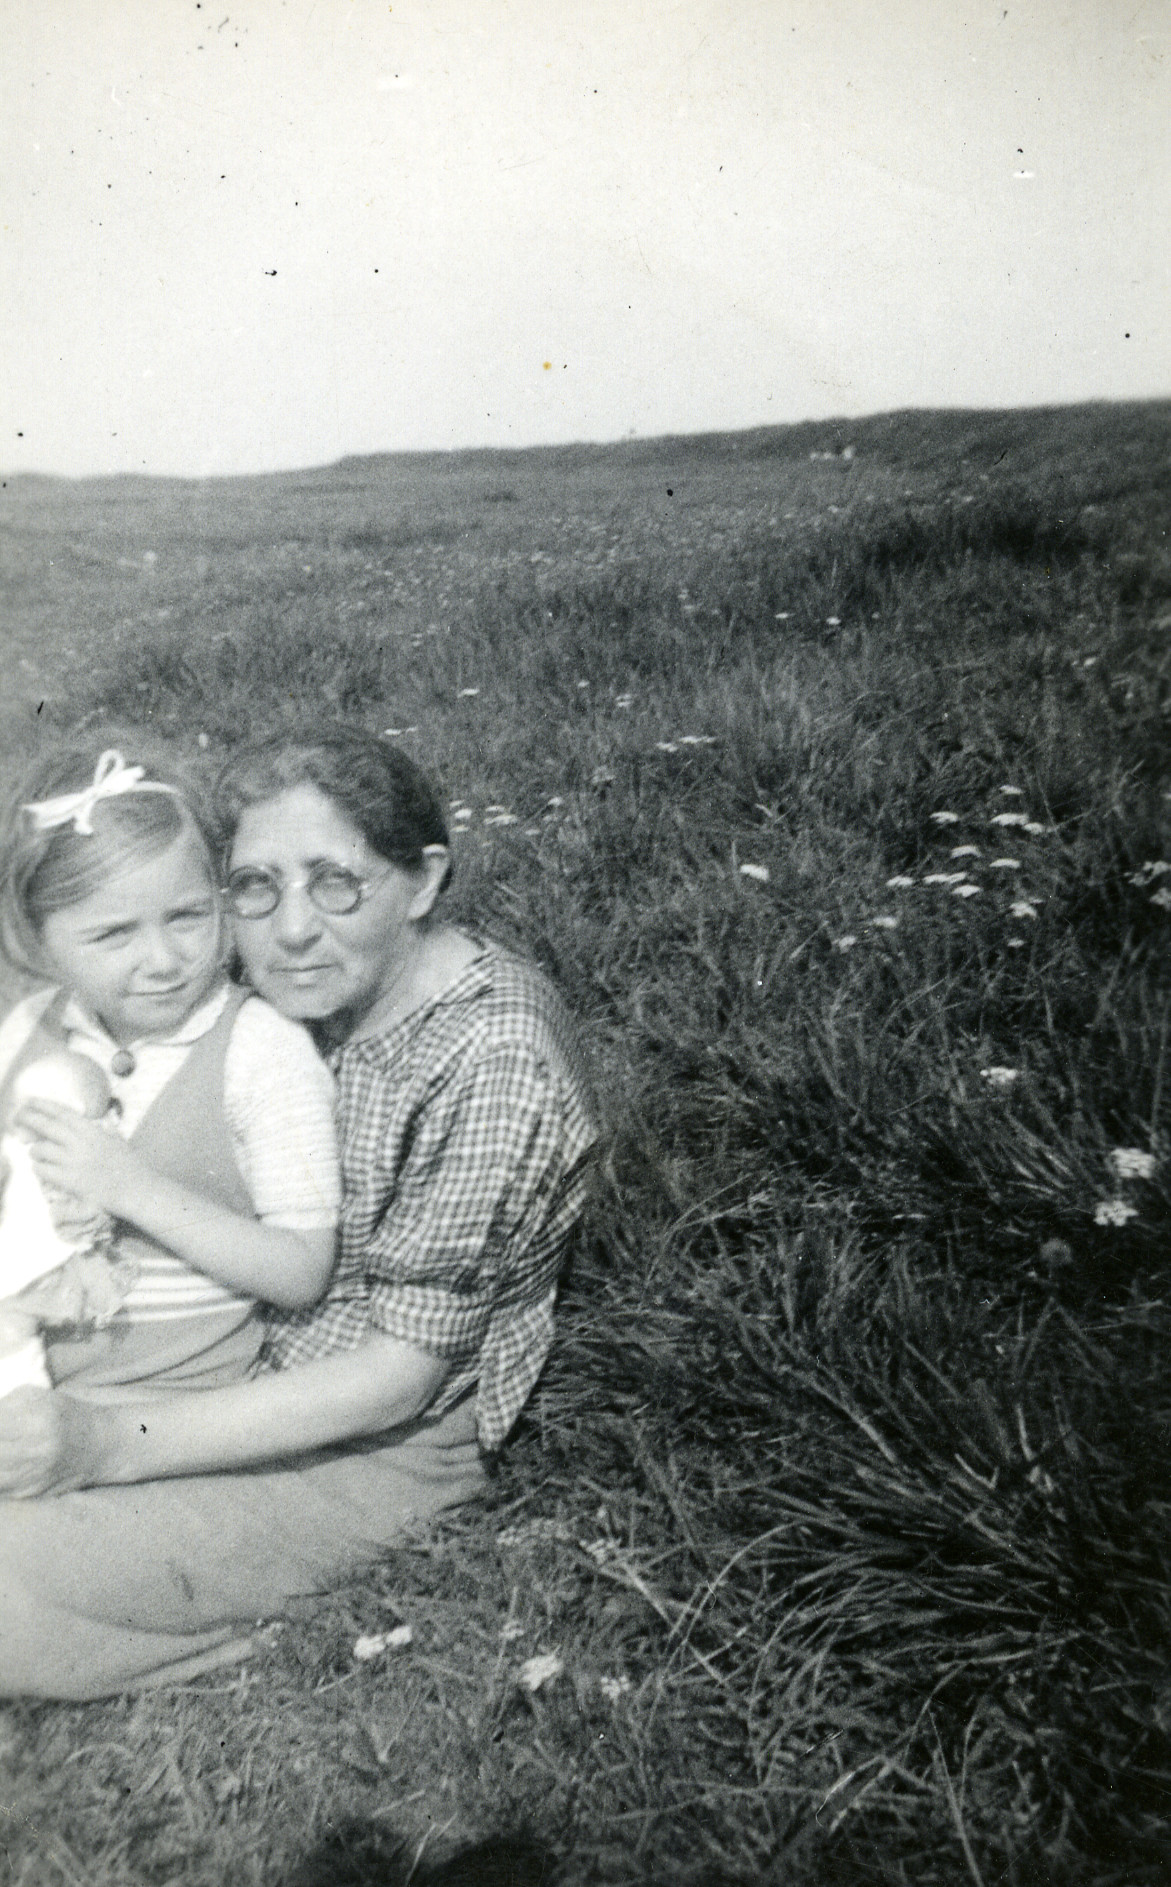 Mireille Dores and her grandmother, Dora Abramowitz on their last vacation before the war, at Onival.

Dora Abramovitz was deported to Drancy, then to Auschwitz in February 1943, where she perished.